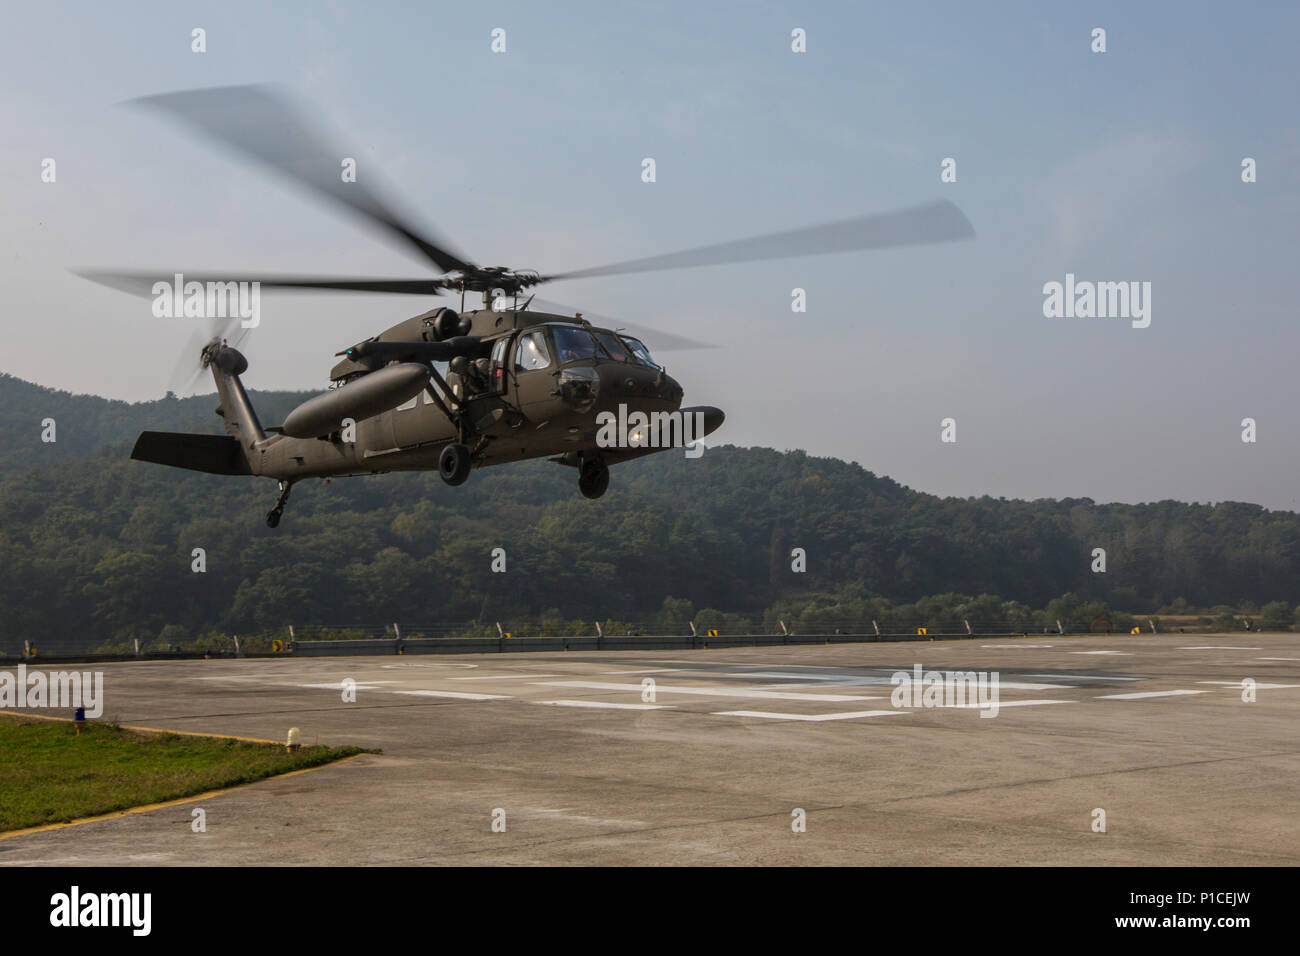 A UH-1Y Venom lands on a helipad in Baran, South Korea, Oct. 15, 2016. Commandant of the Marine Corps Gen. Robert B. Neller visited Baran to meet with Republic of Korea (ROK) Marine Corps Gen. Shin Hyun-joon, commandant of the ROK Marine Corps. (U.S. Marine Corps photo by Cpl. Samantha K. Braun) Stock Photo